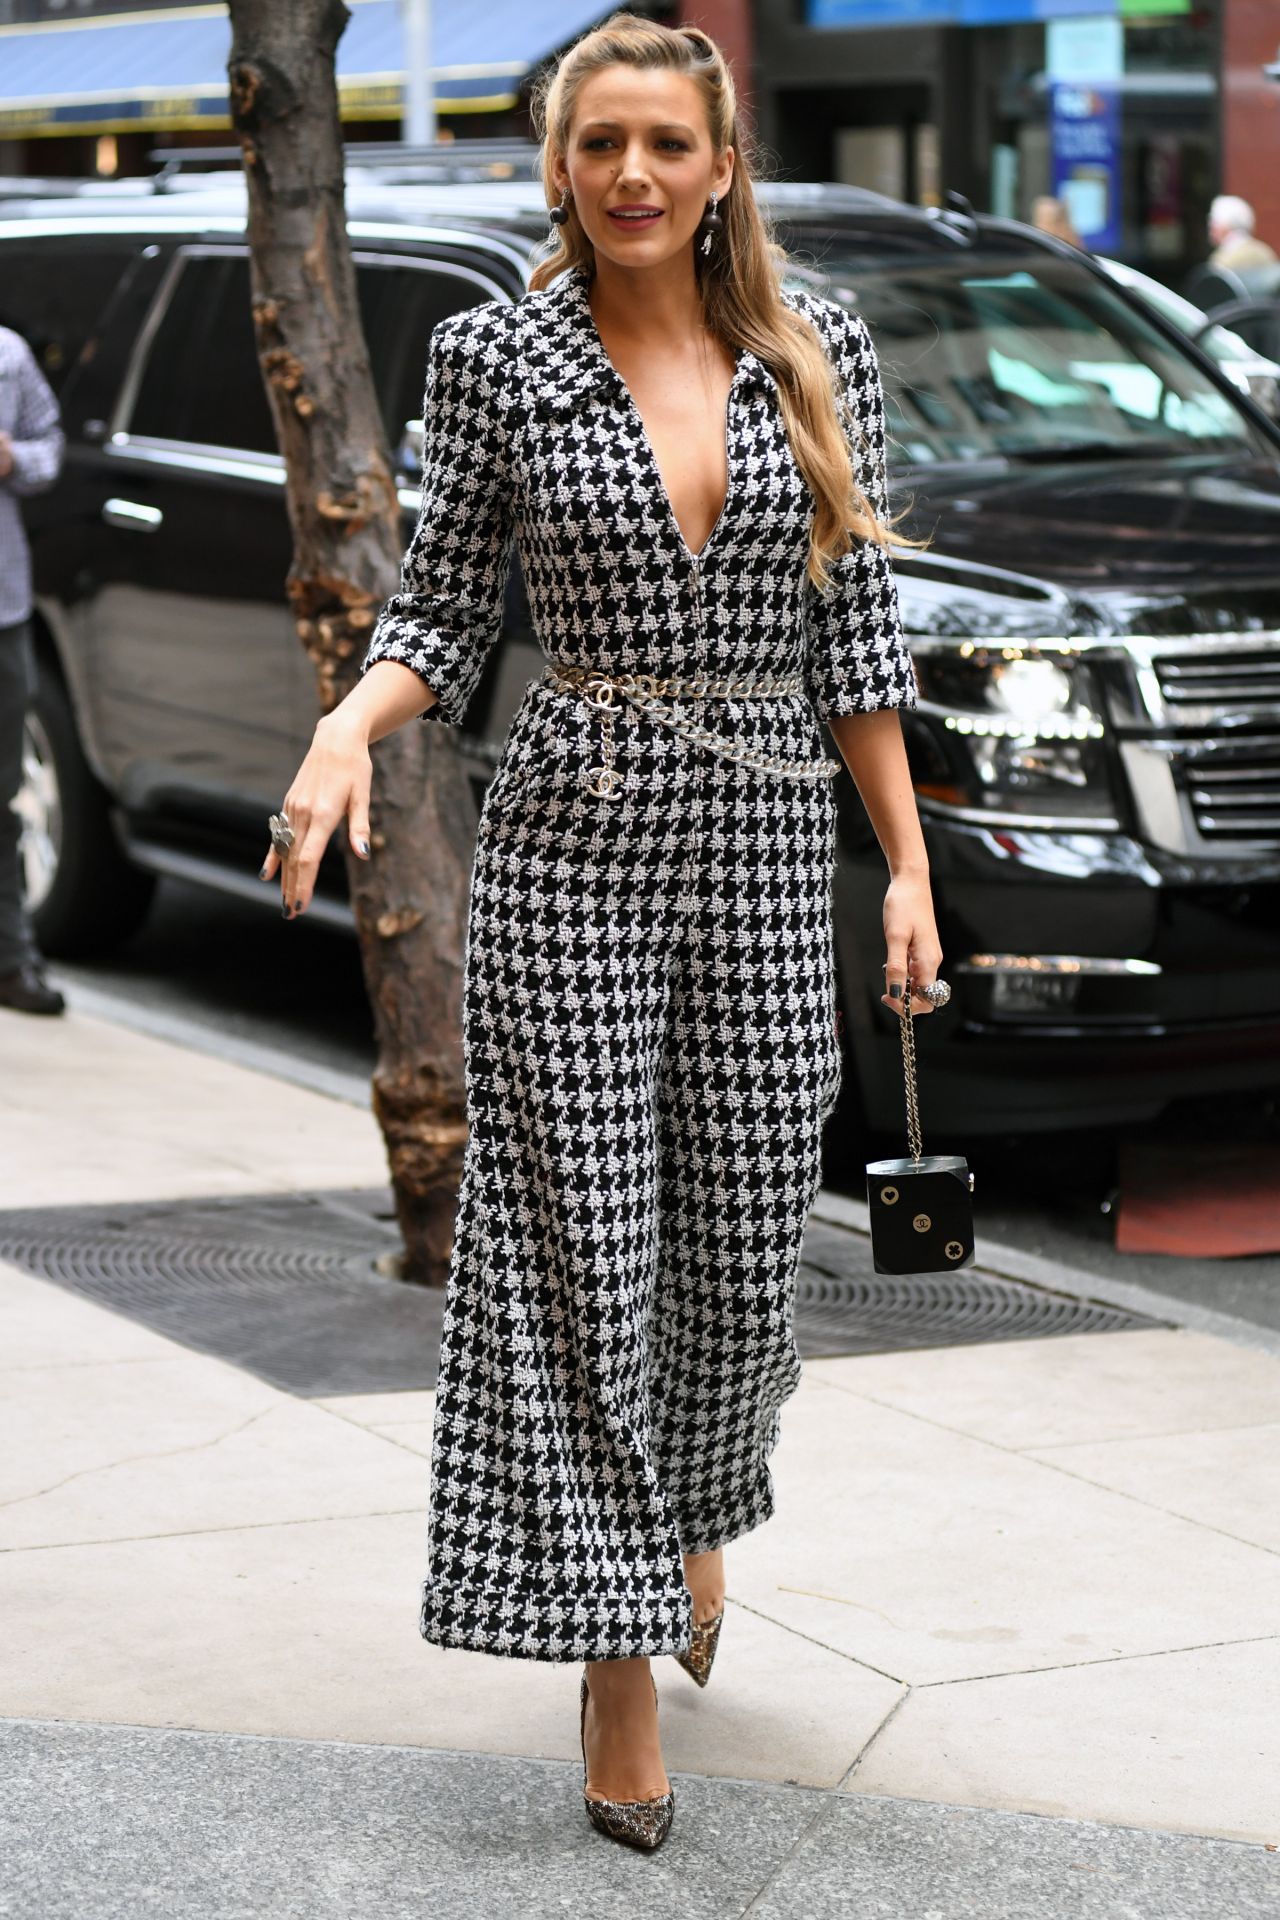 Blake Lively Style and Fashion Inspirations - Arriving at Her Hotel in ...